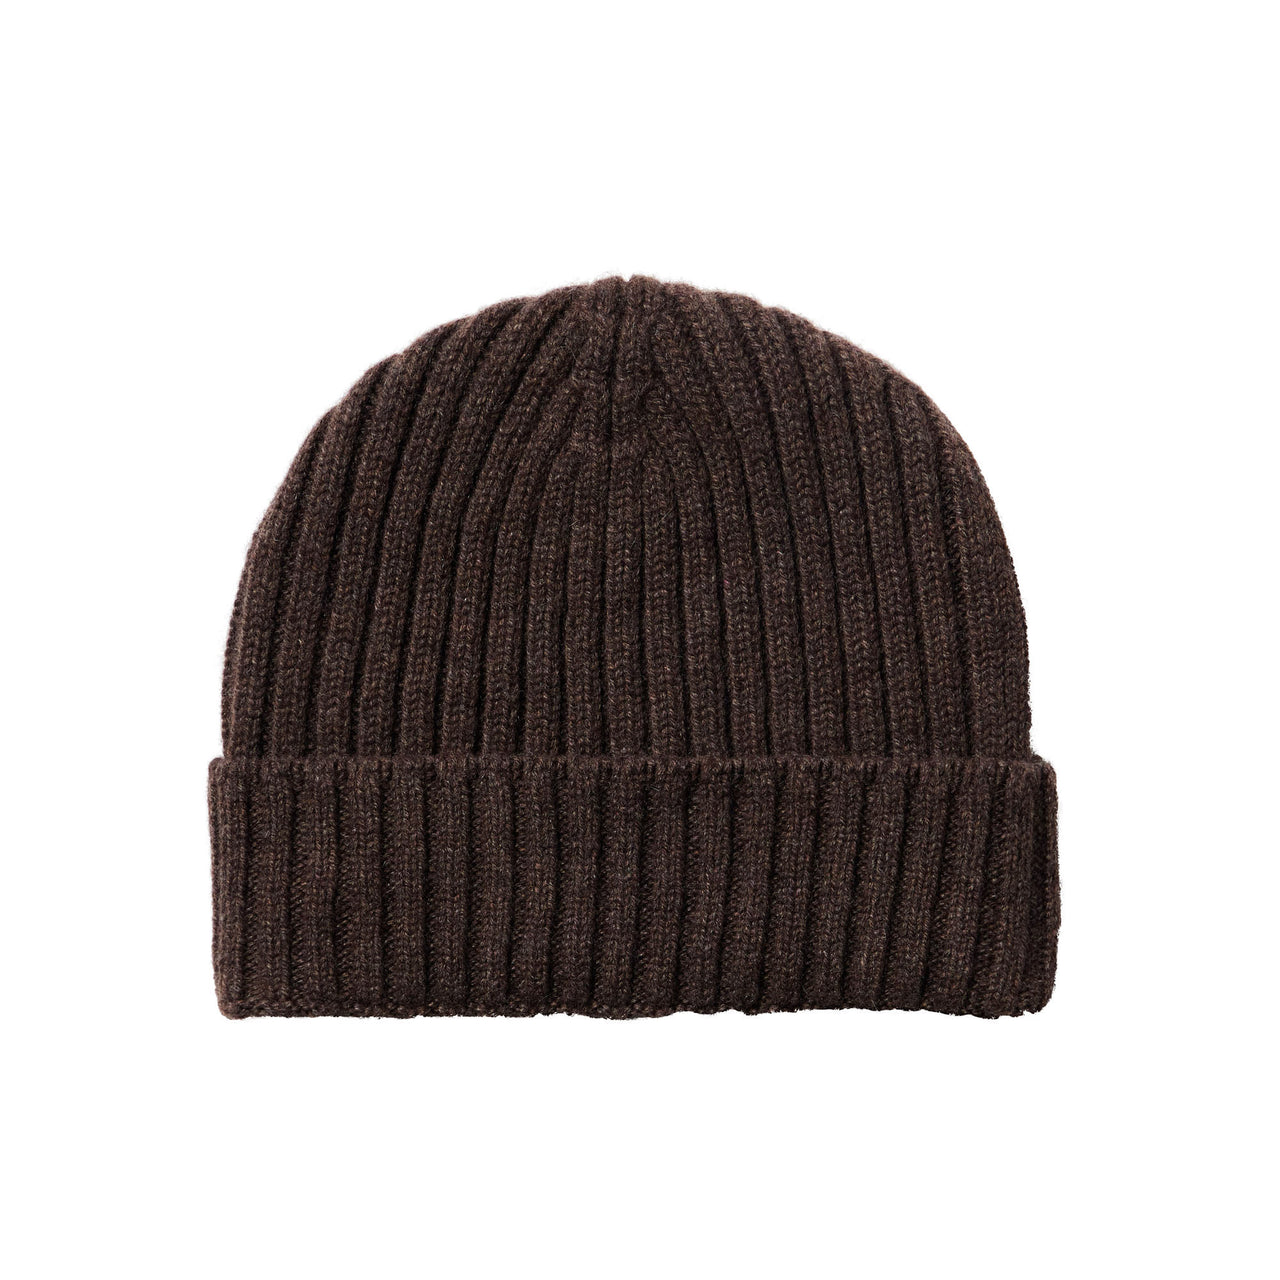 HENRY SARTORIAL X CANTINI Cashmere Beanie CHARCOAL